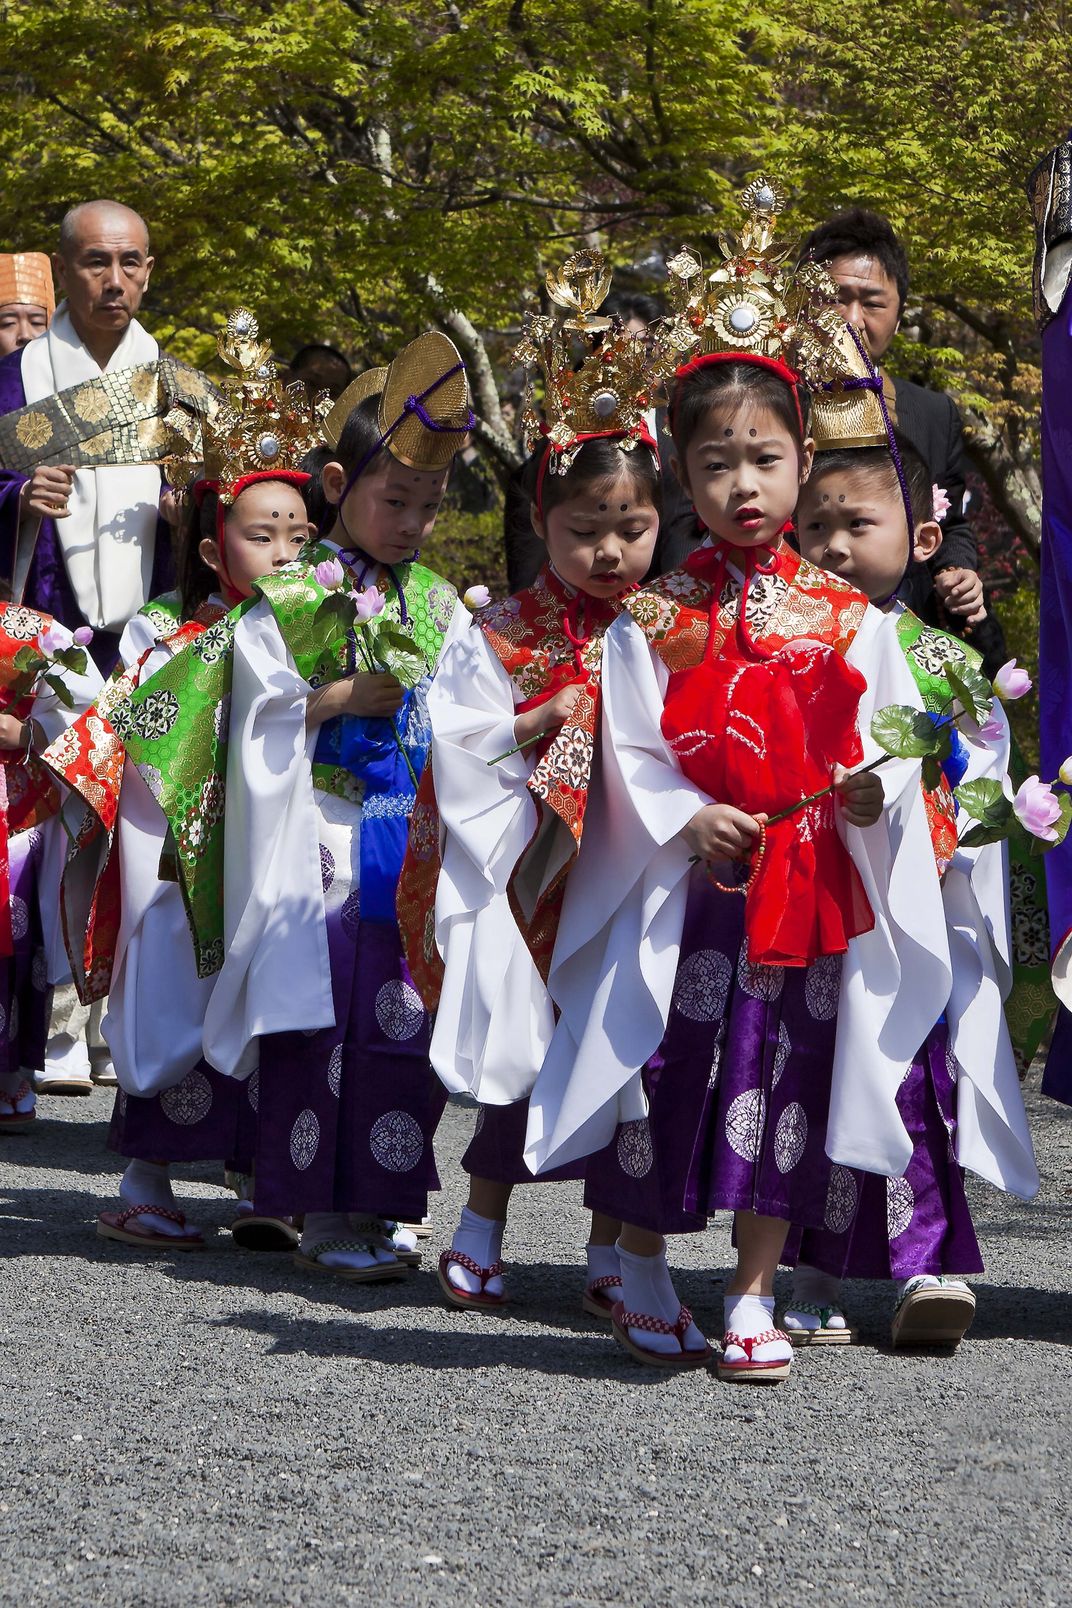 Ceremonial Children In Traditional Shinto Dress Taking Part In An